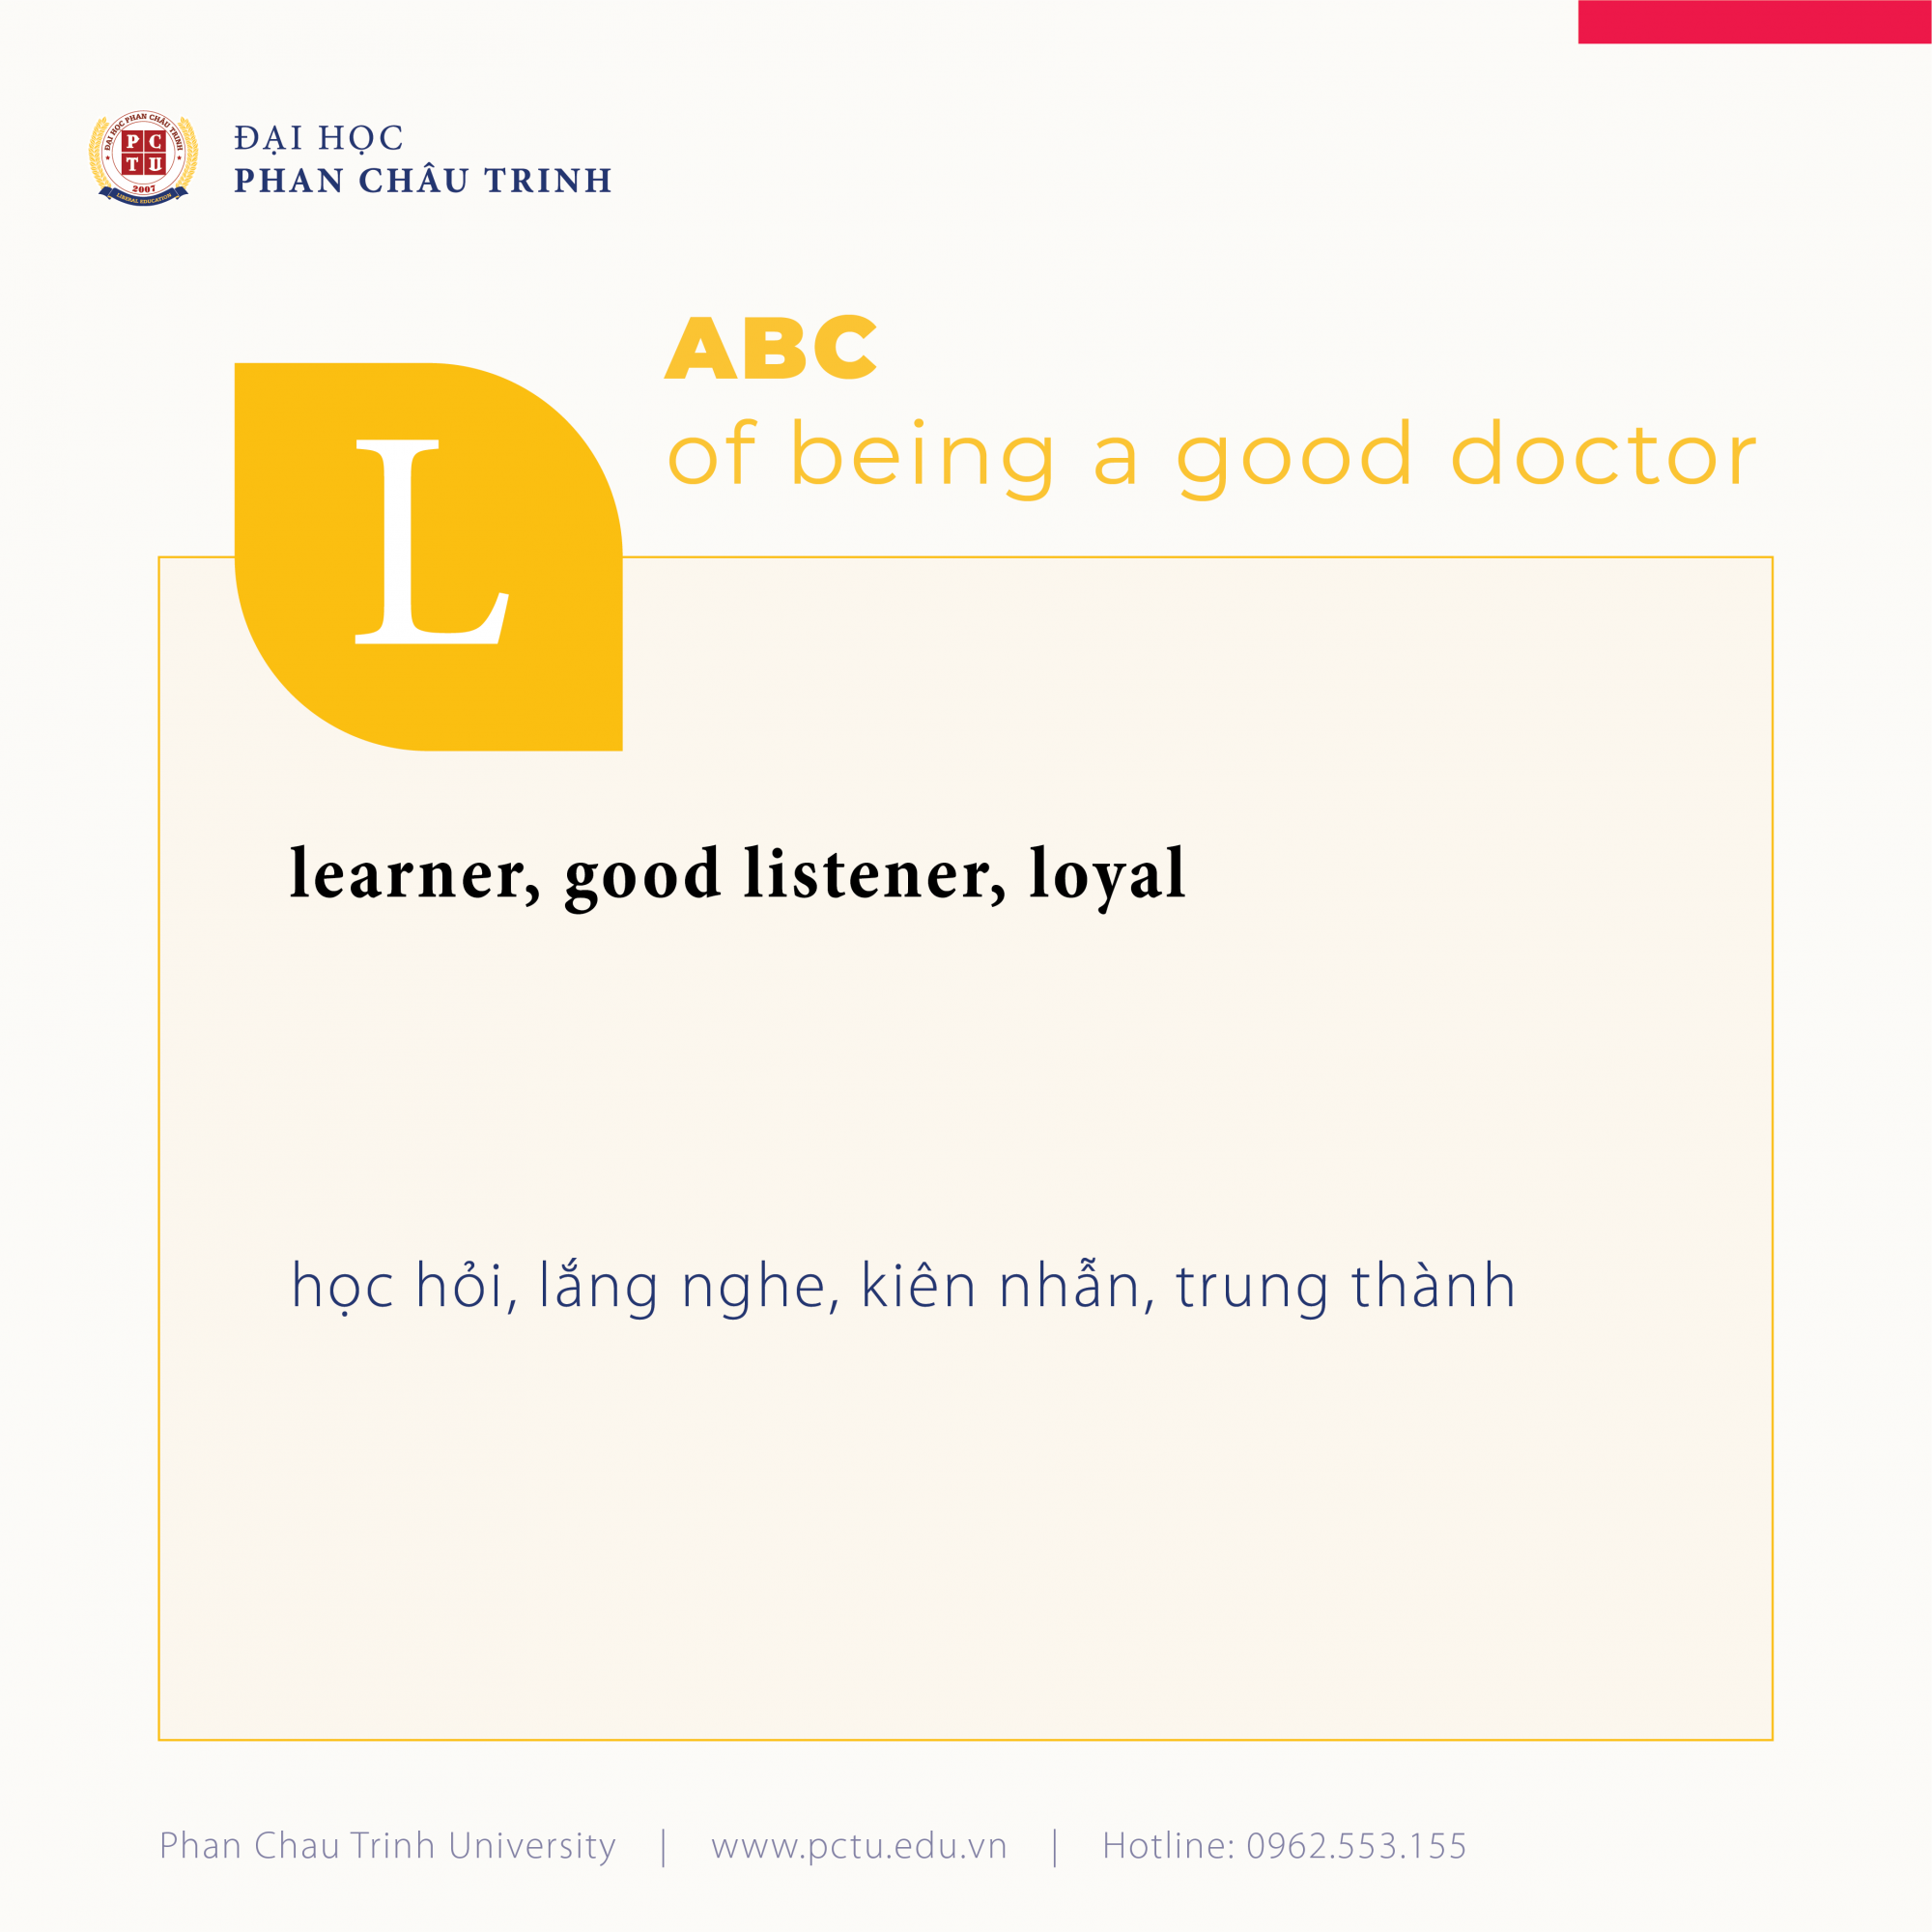 ABC_of_being_a_good_doctor-02